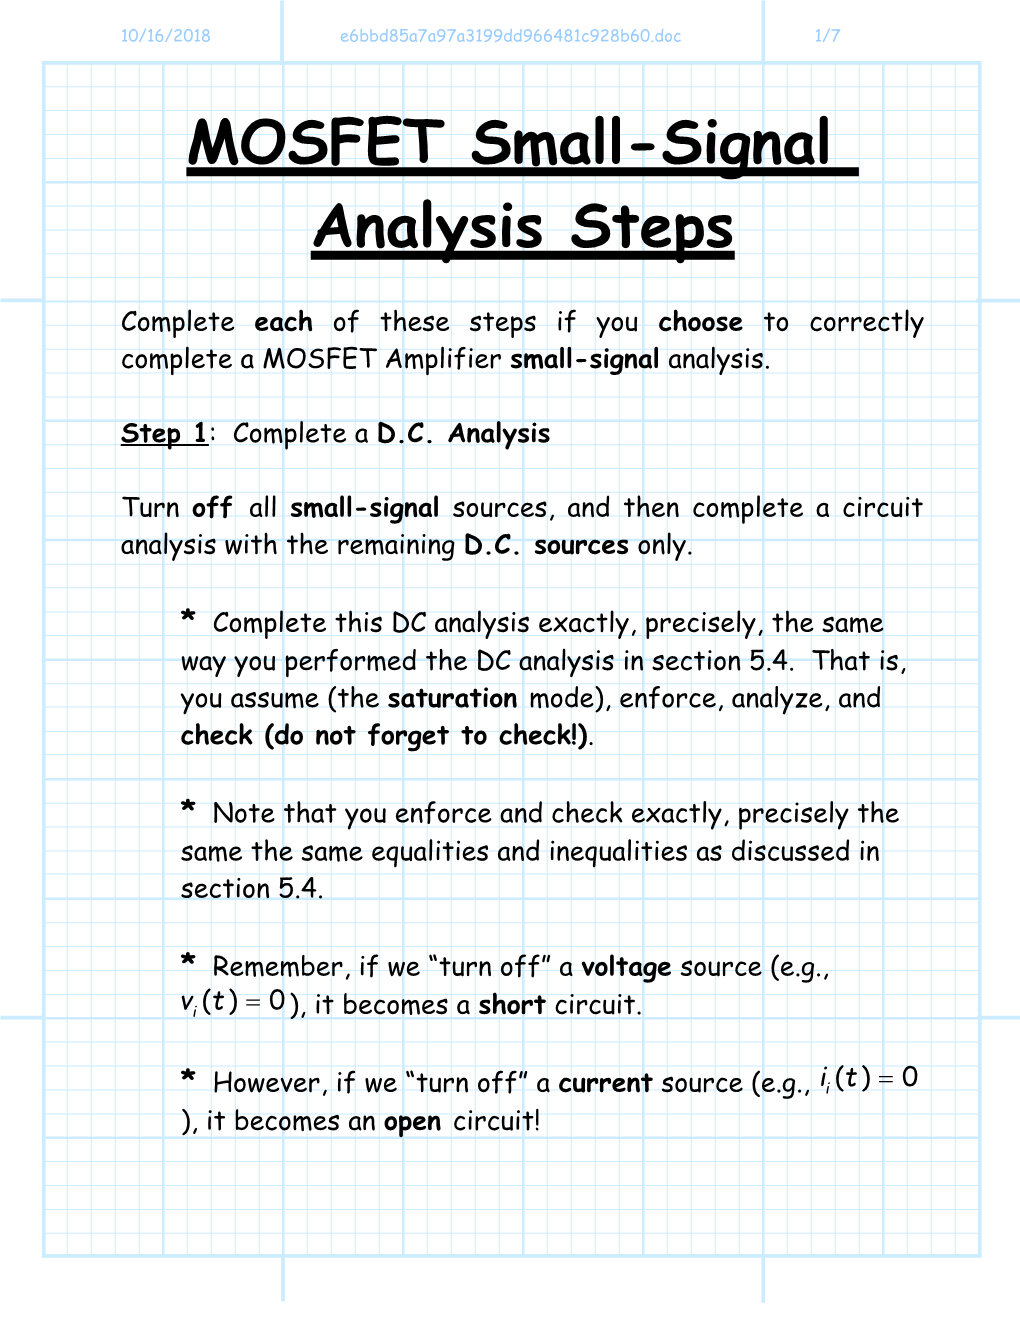 10/22/2018Steps for MOSFET Small Signal Analysis1/7